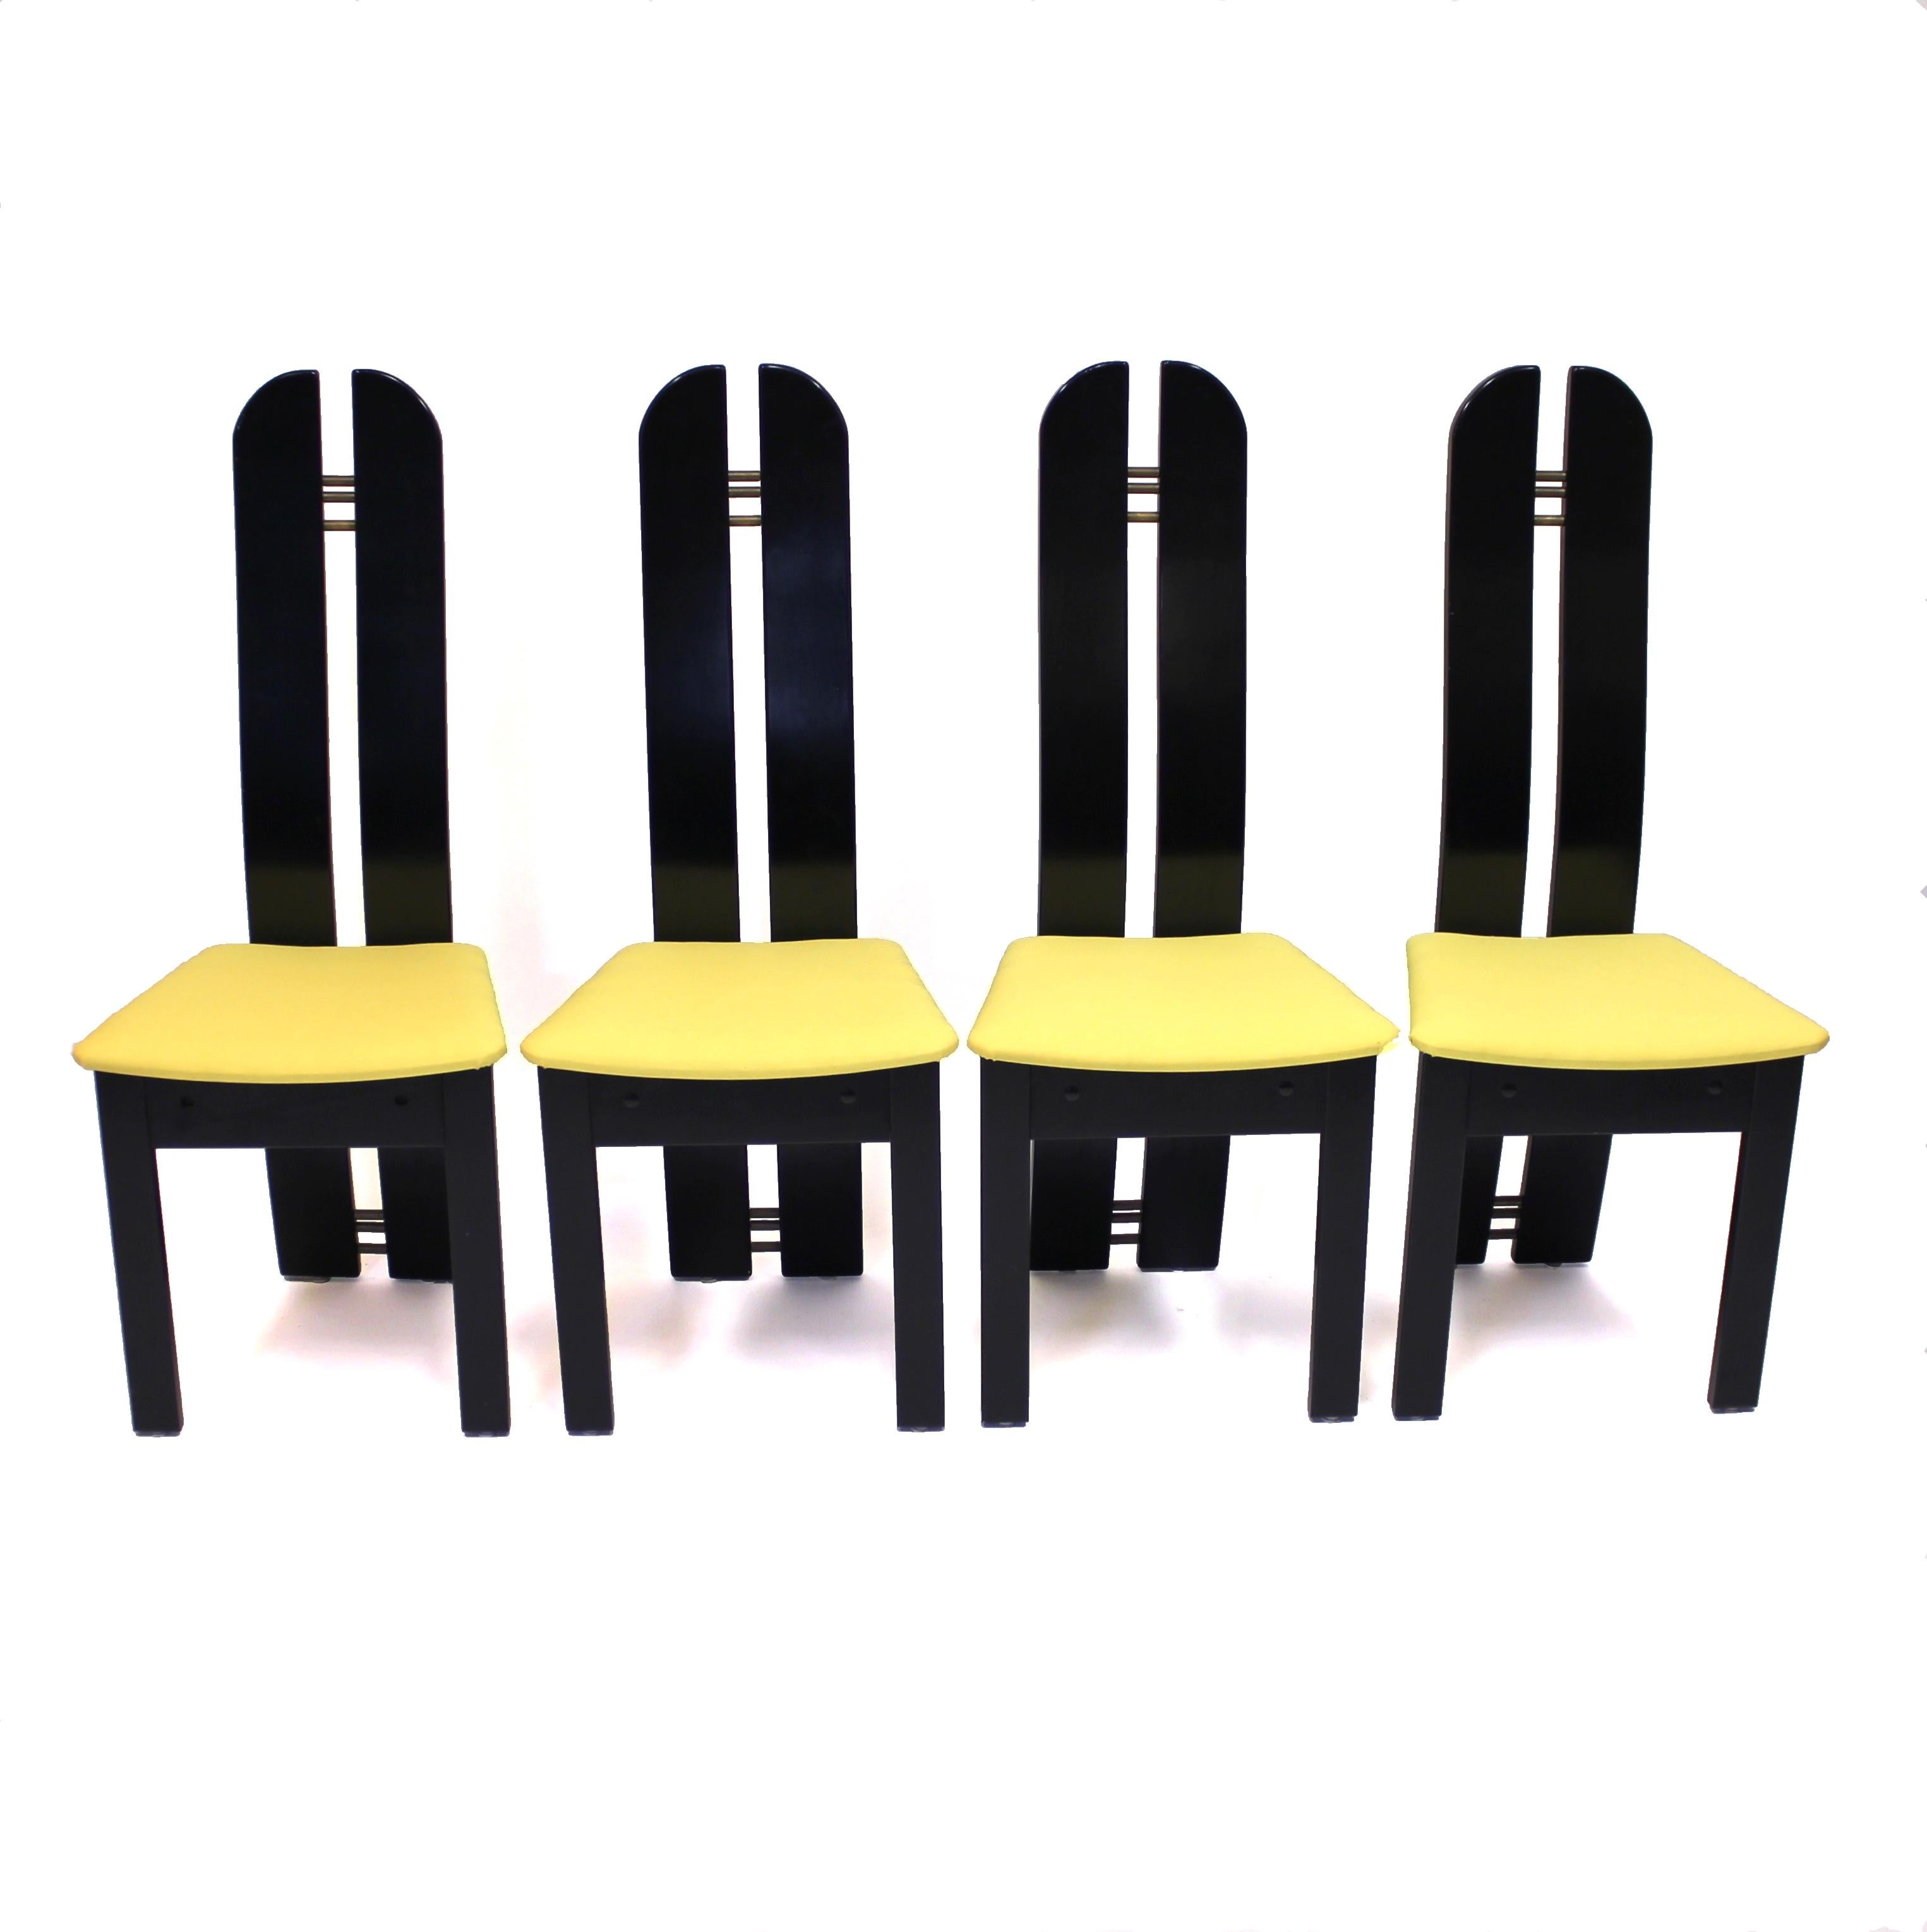 Set of 4 high back postmodern chairs, made by Danish company Mørkøv Møbelindustri ApS who is still operating today. Produced and designed in the 1980s. Made of black lacquered wood and newly upholstered seats in a bright yellow fabric, very